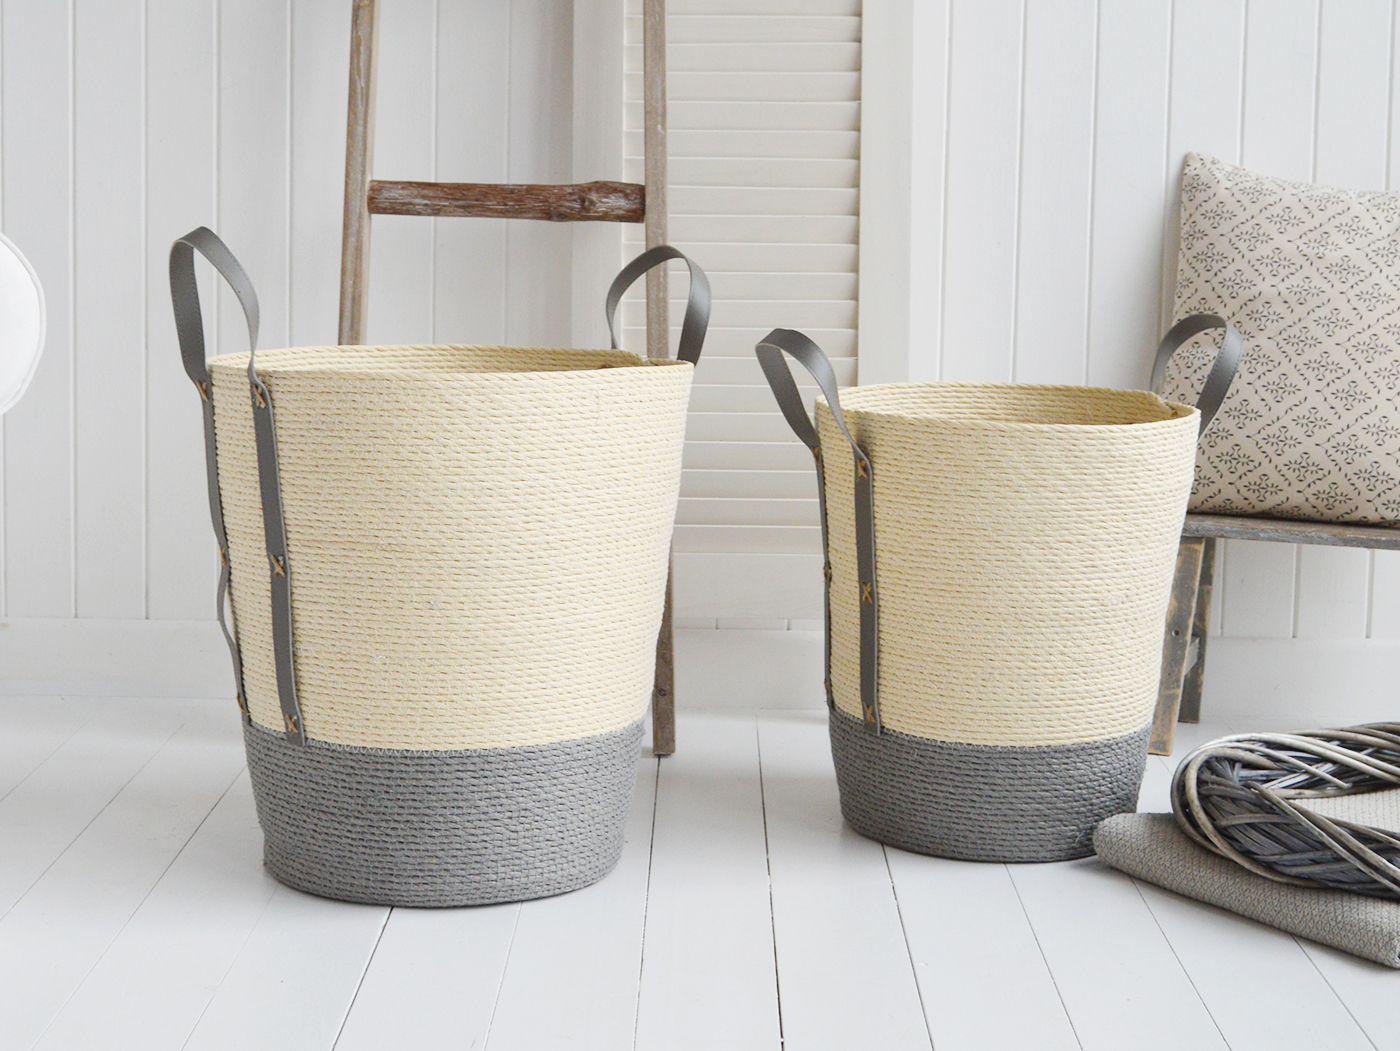 New Hampshire tall set of baskets toys and everyday storage from The White Lighthouse Furniture and Home Interiors for New England, country, coastal farmhouse and city homes for hallway, living room, bedroom and bathroom